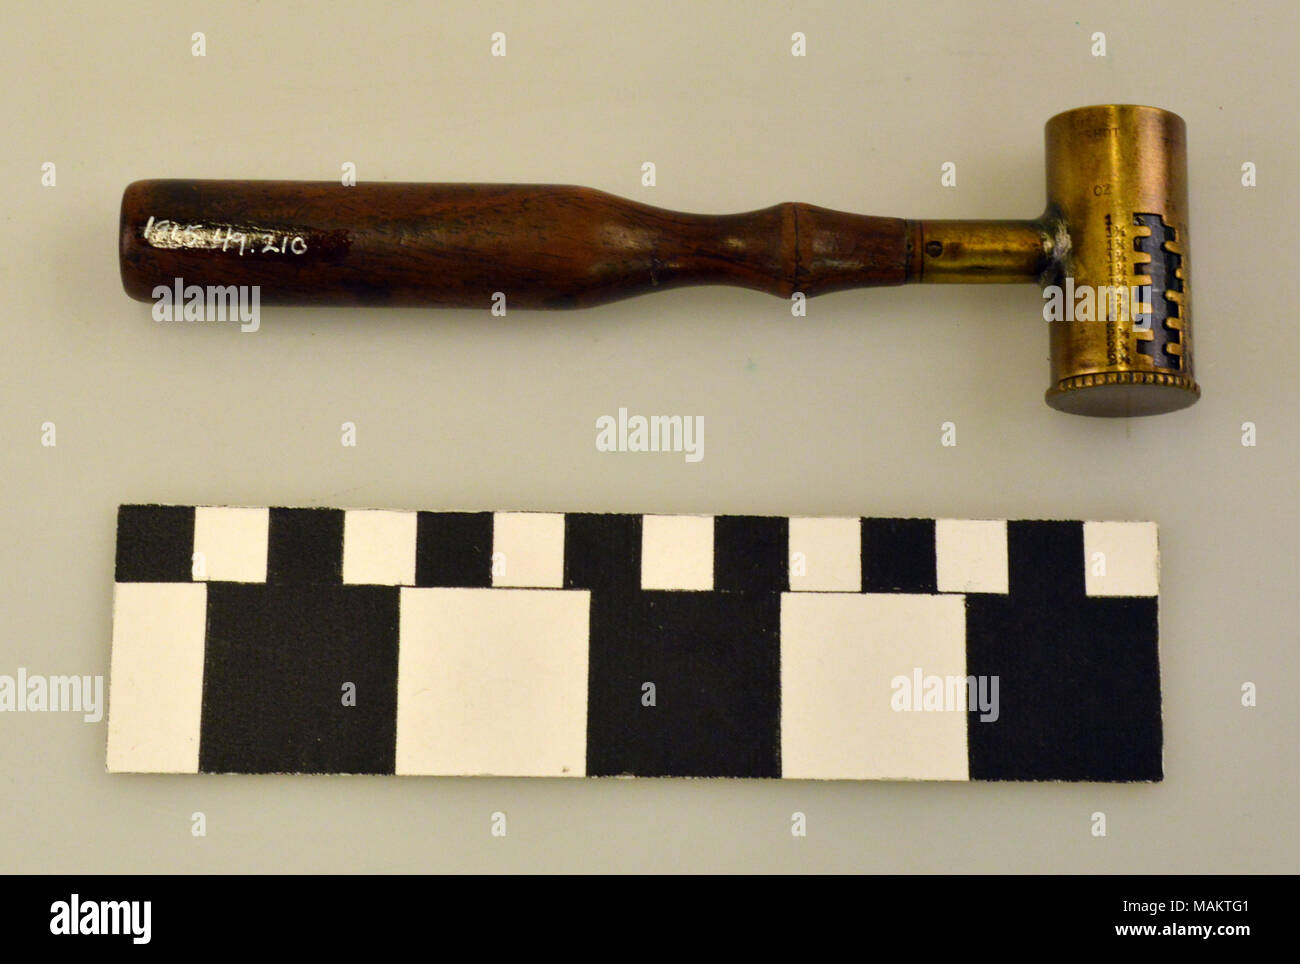 Brass powder measure with graduated measurements in drams and ounces. Measure has a turned wood handle. Title: Wood Handled Brass Powder Measure  . between 1815 and 1915. Stock Photo